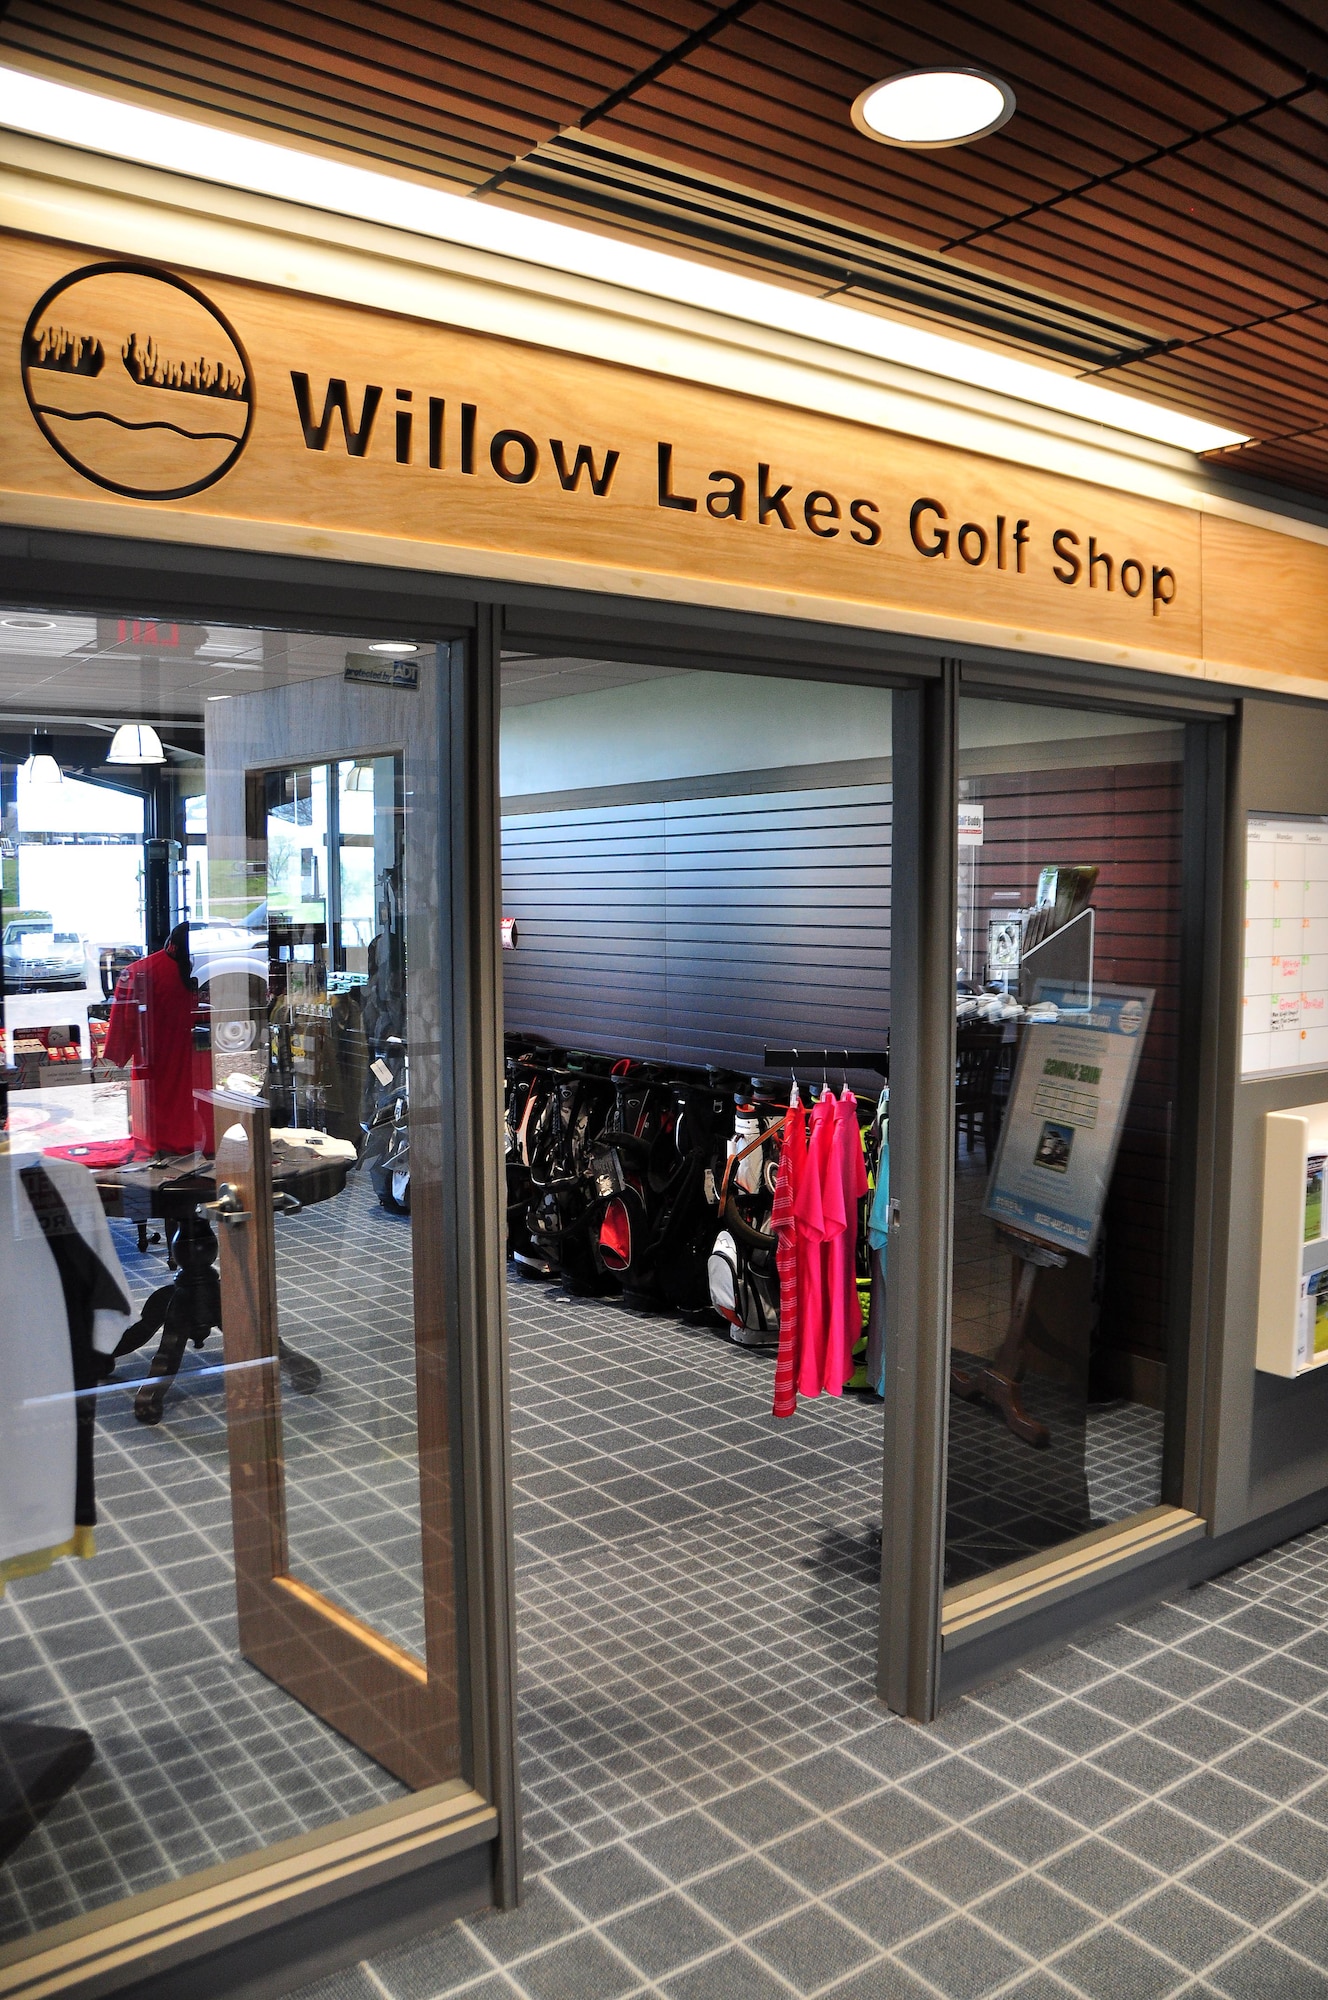 The entrance of the Willow Lakes Golf Course, along with several other features of the golf shop, have been renovated to make the facility more user friendly and inviting to customers at Offutt Air Force Base, Neb.